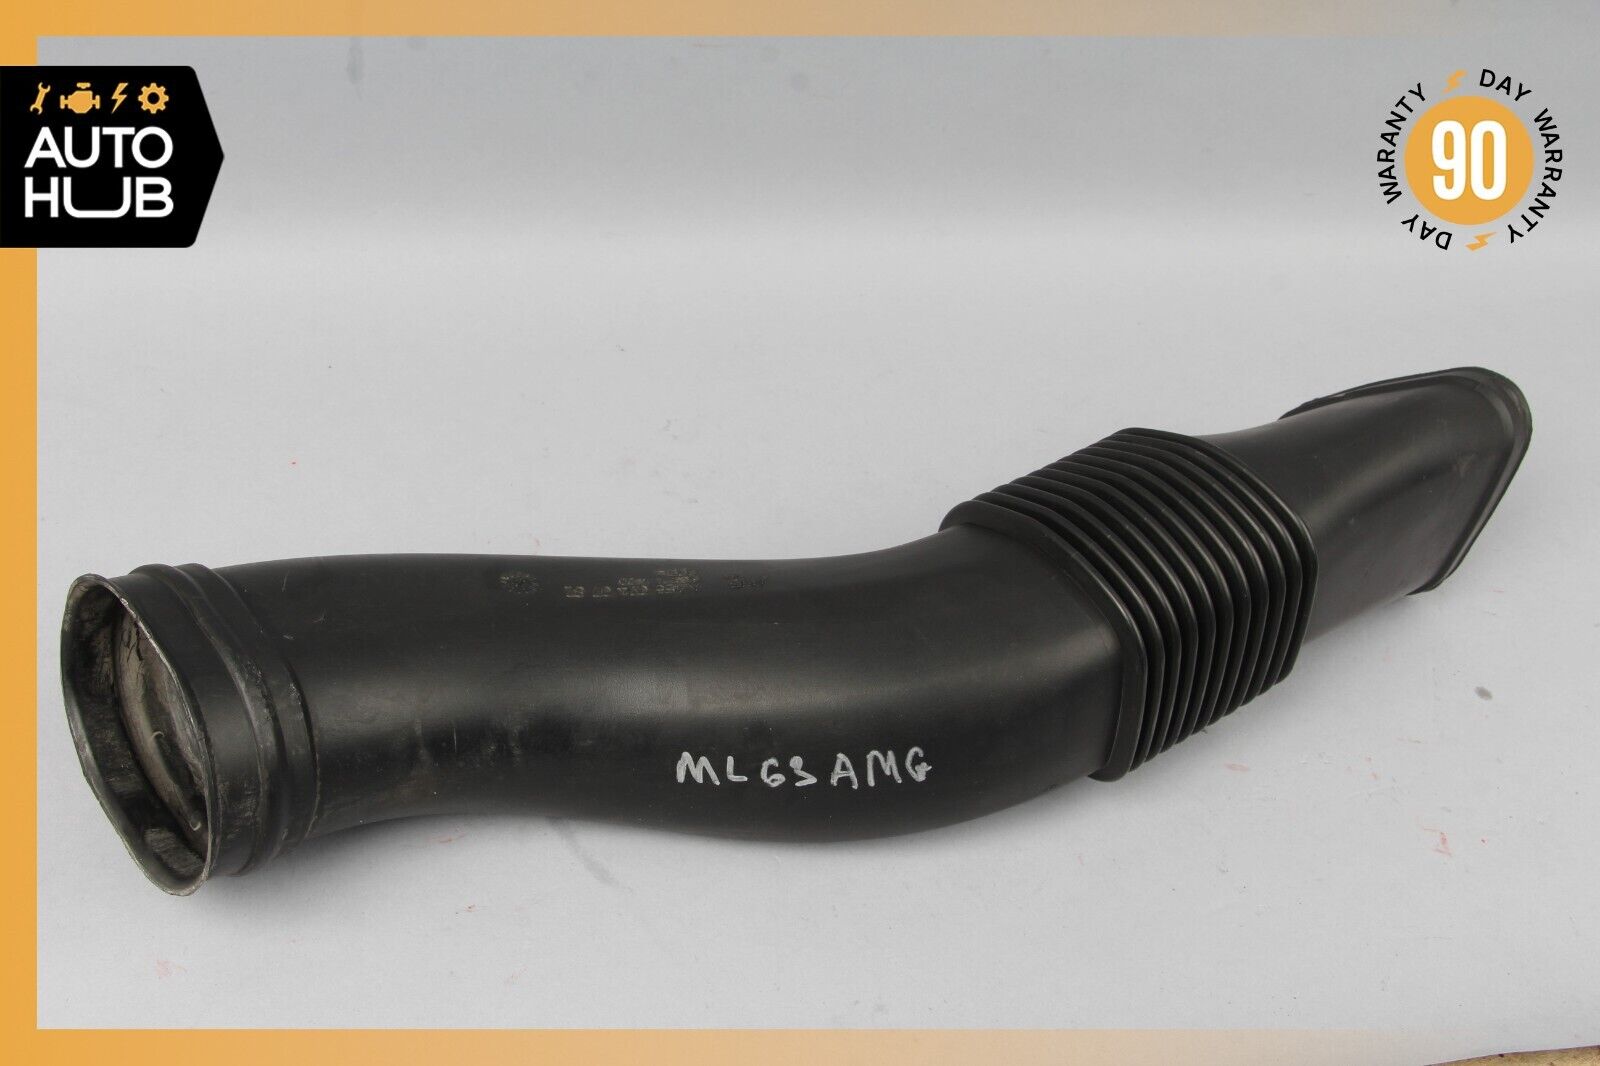 07-11 Mercedes W164 ML63 AMG Air Intake Duct Pipe Hose Left Driver Side OEM